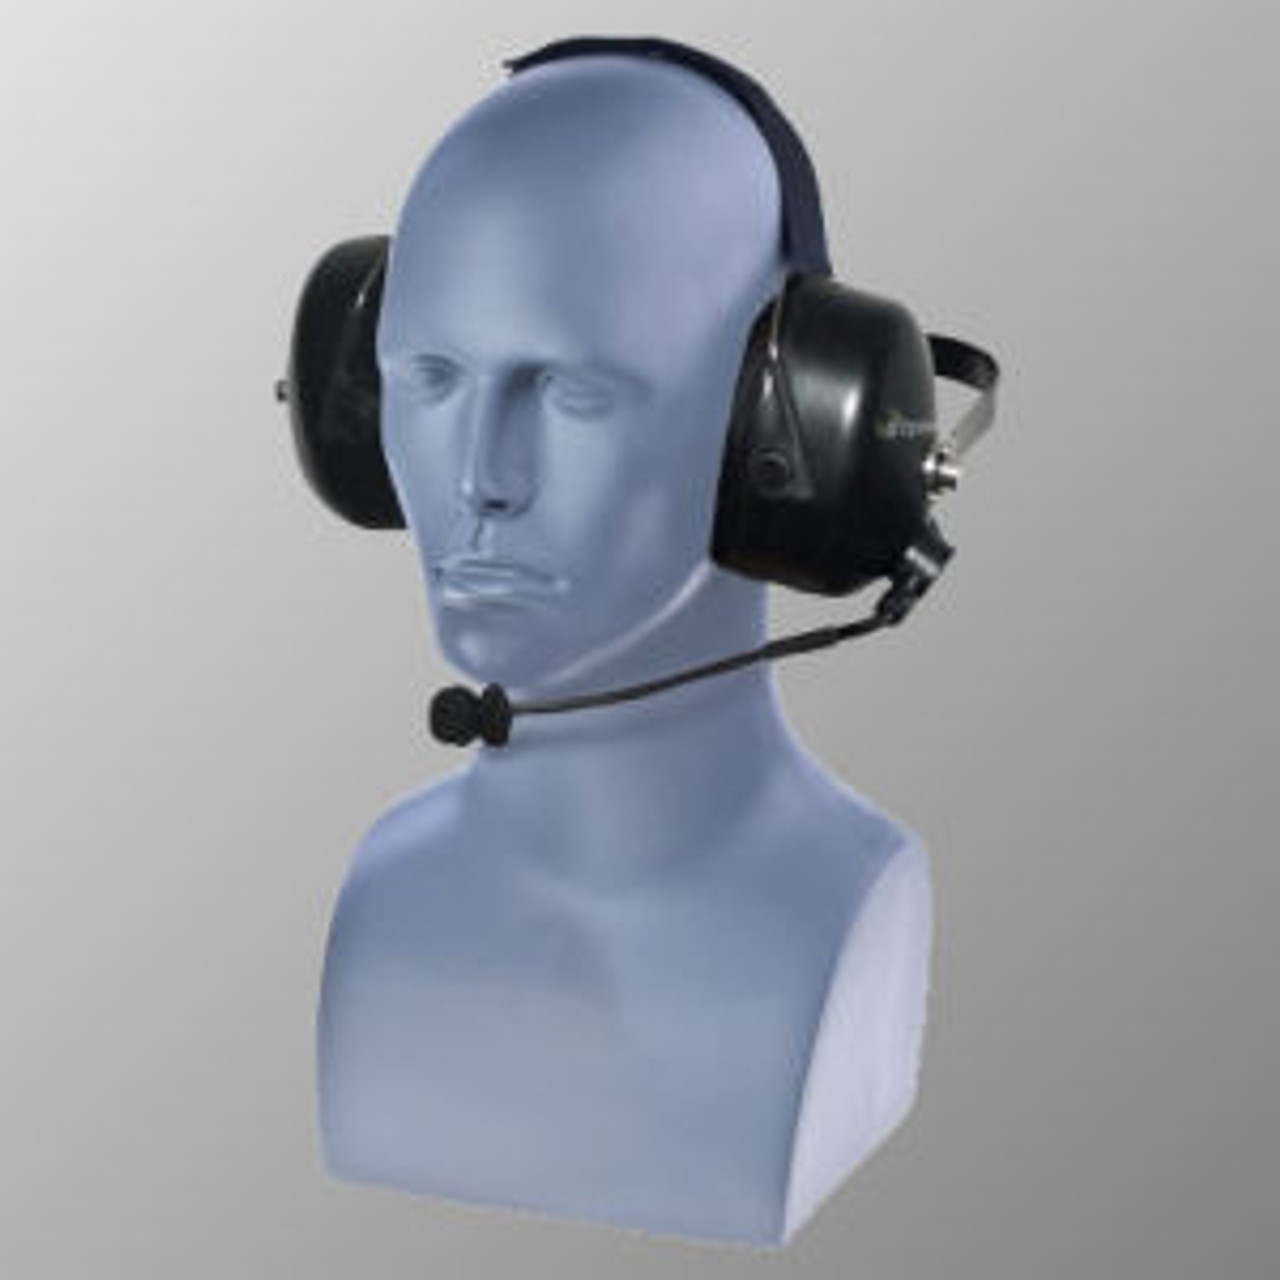 Relm / BK LPX Noise Canceling Double Muff Behind The Head Headset